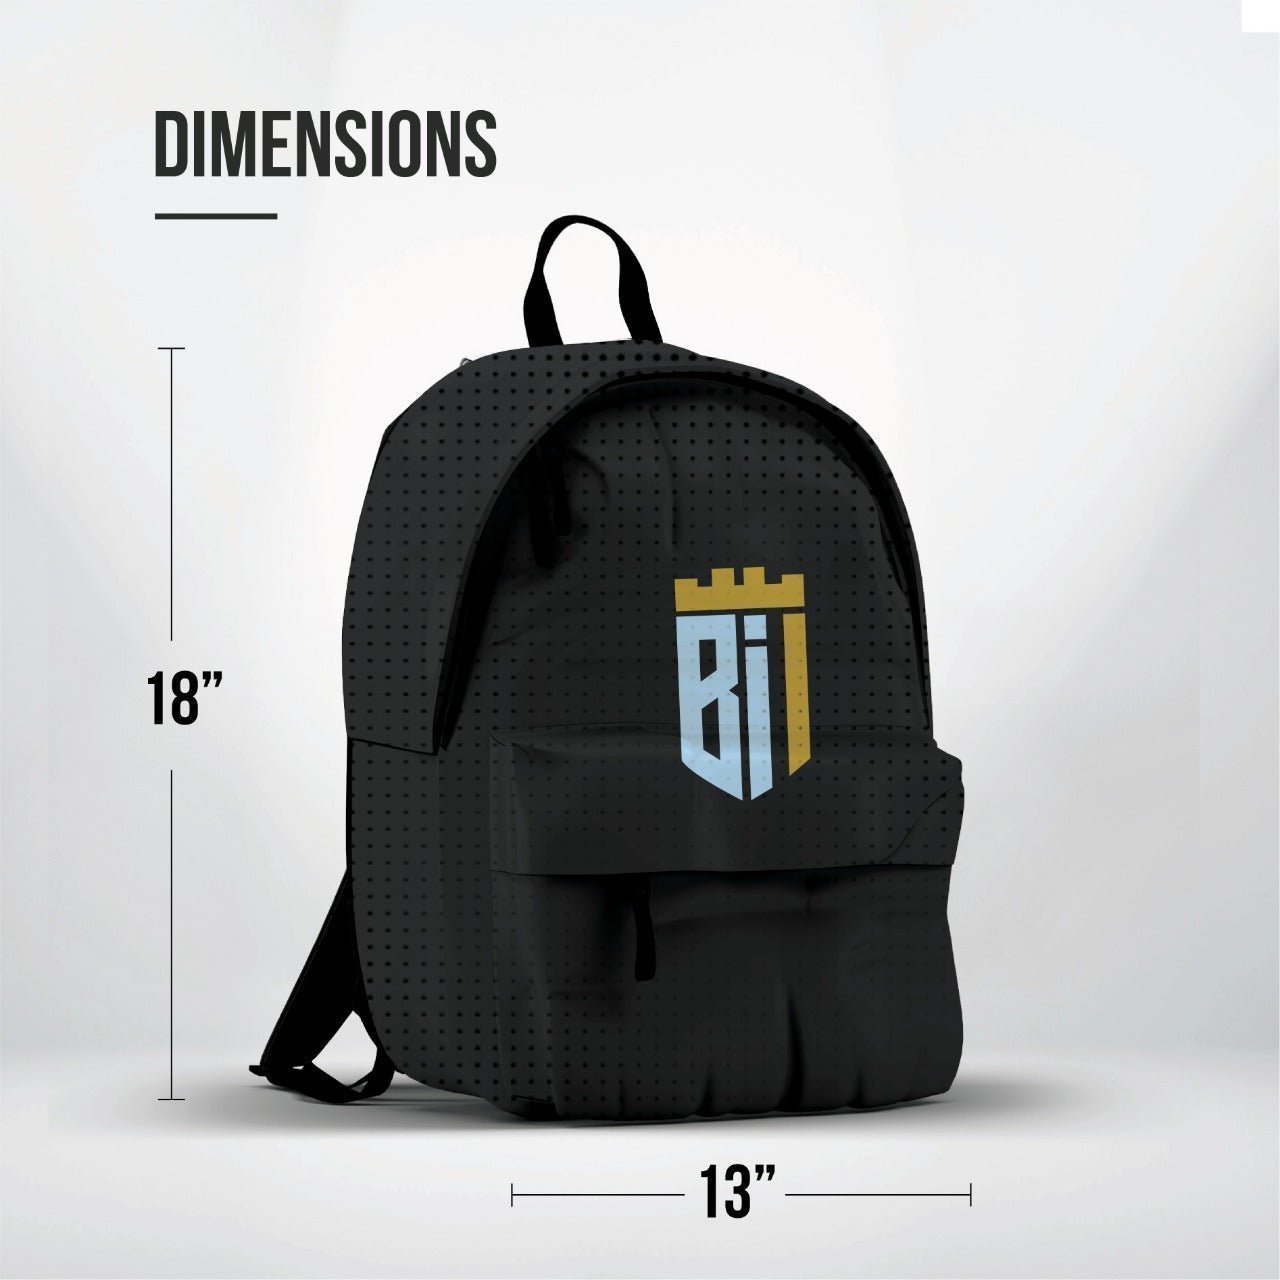 DB109 Comics Allover Printed Backpack - BREACHIT